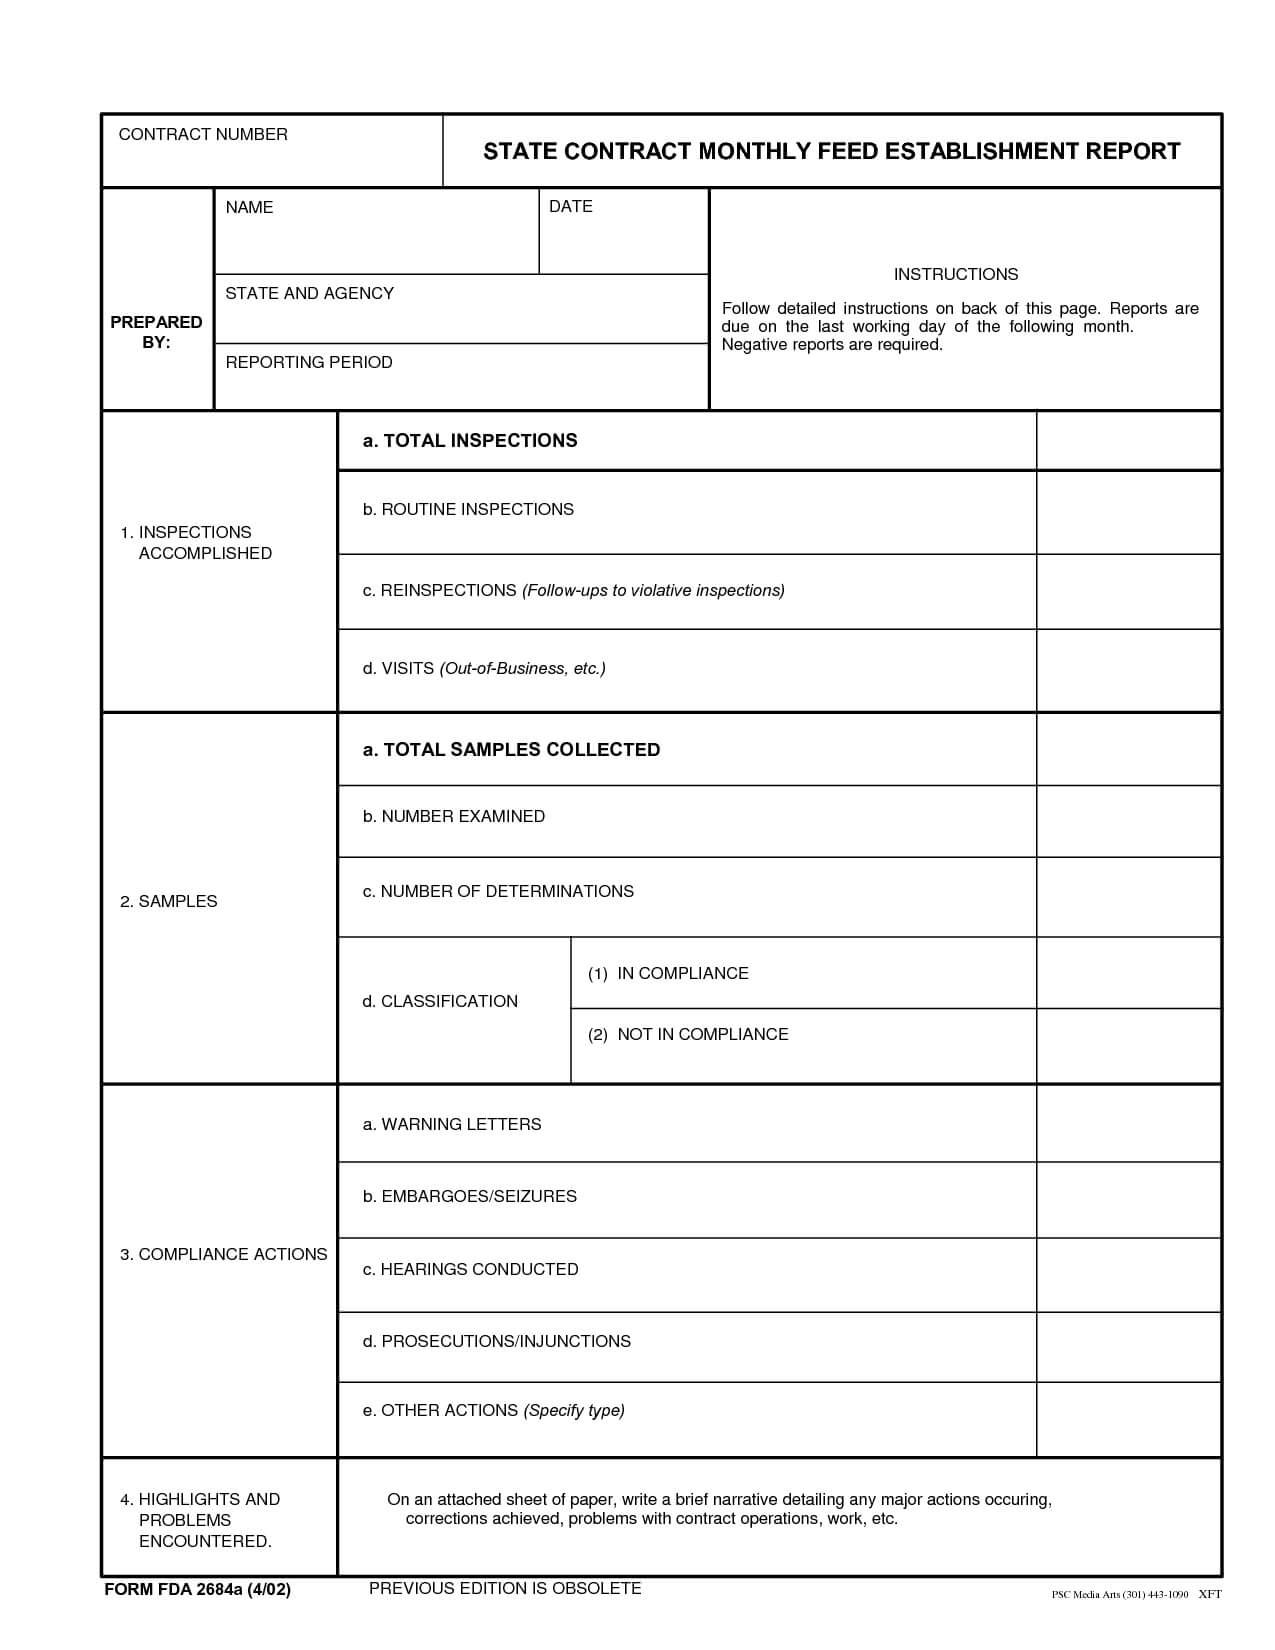 State Report Template ] - Printable Writing Templates For State Report Template